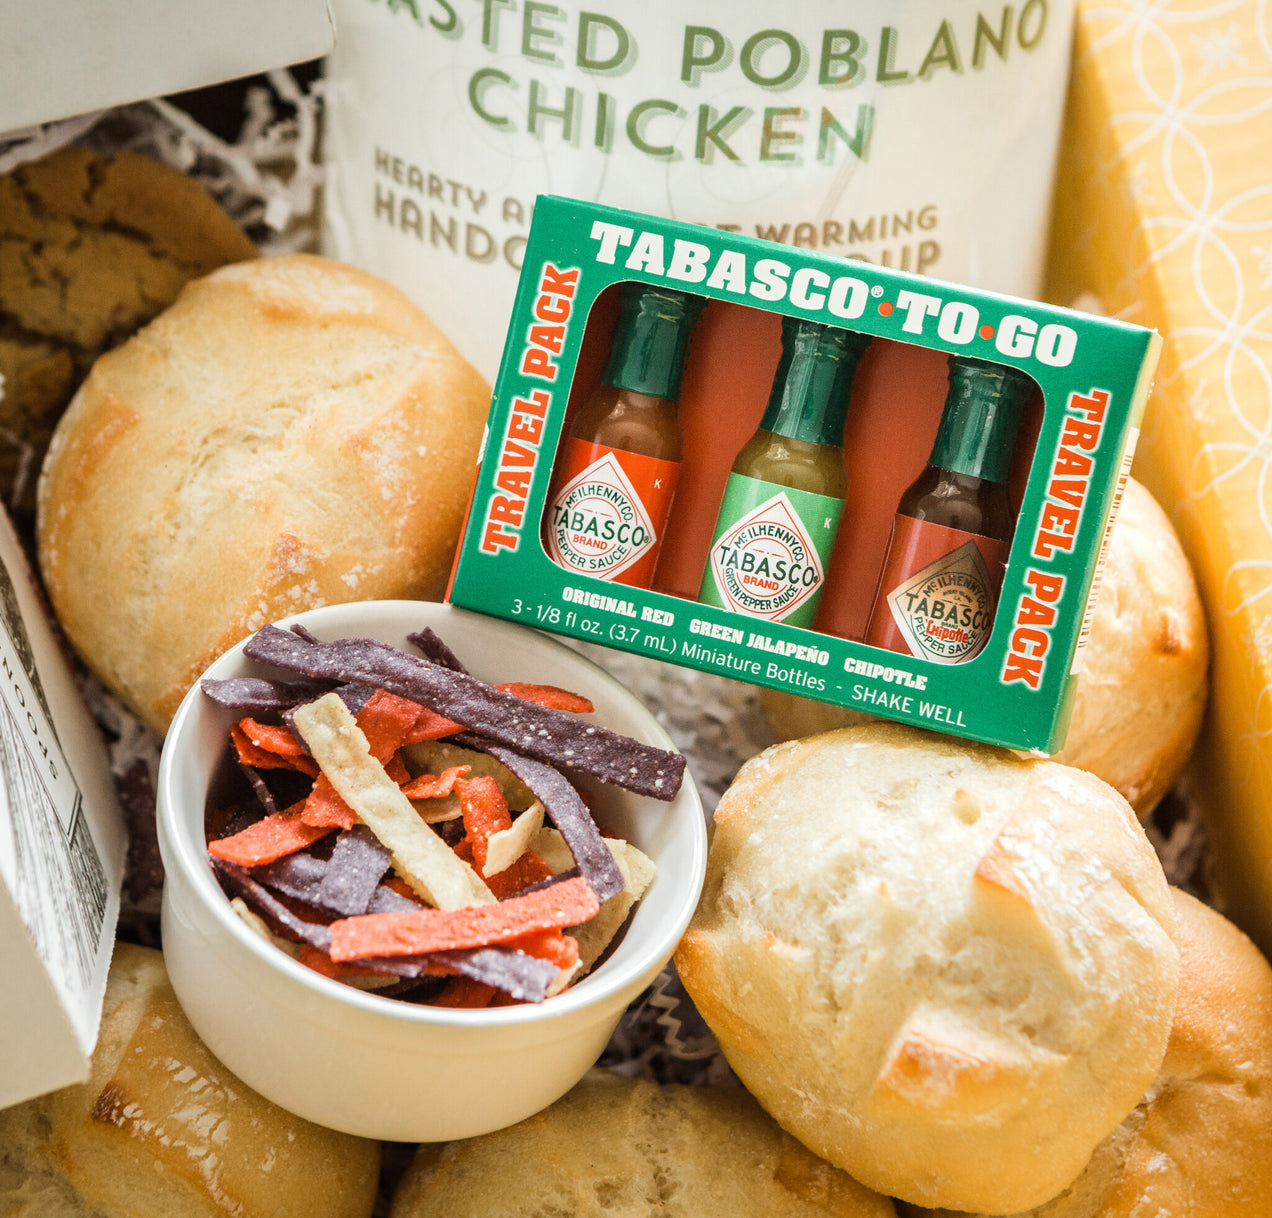 Tabasco To Go, travel pack. Original Red, Green Jalapeno, chipotle. 3 - 1/8 oz 3.7 ml Miniature Bottles - Shake Well. Surrounded by decorative props